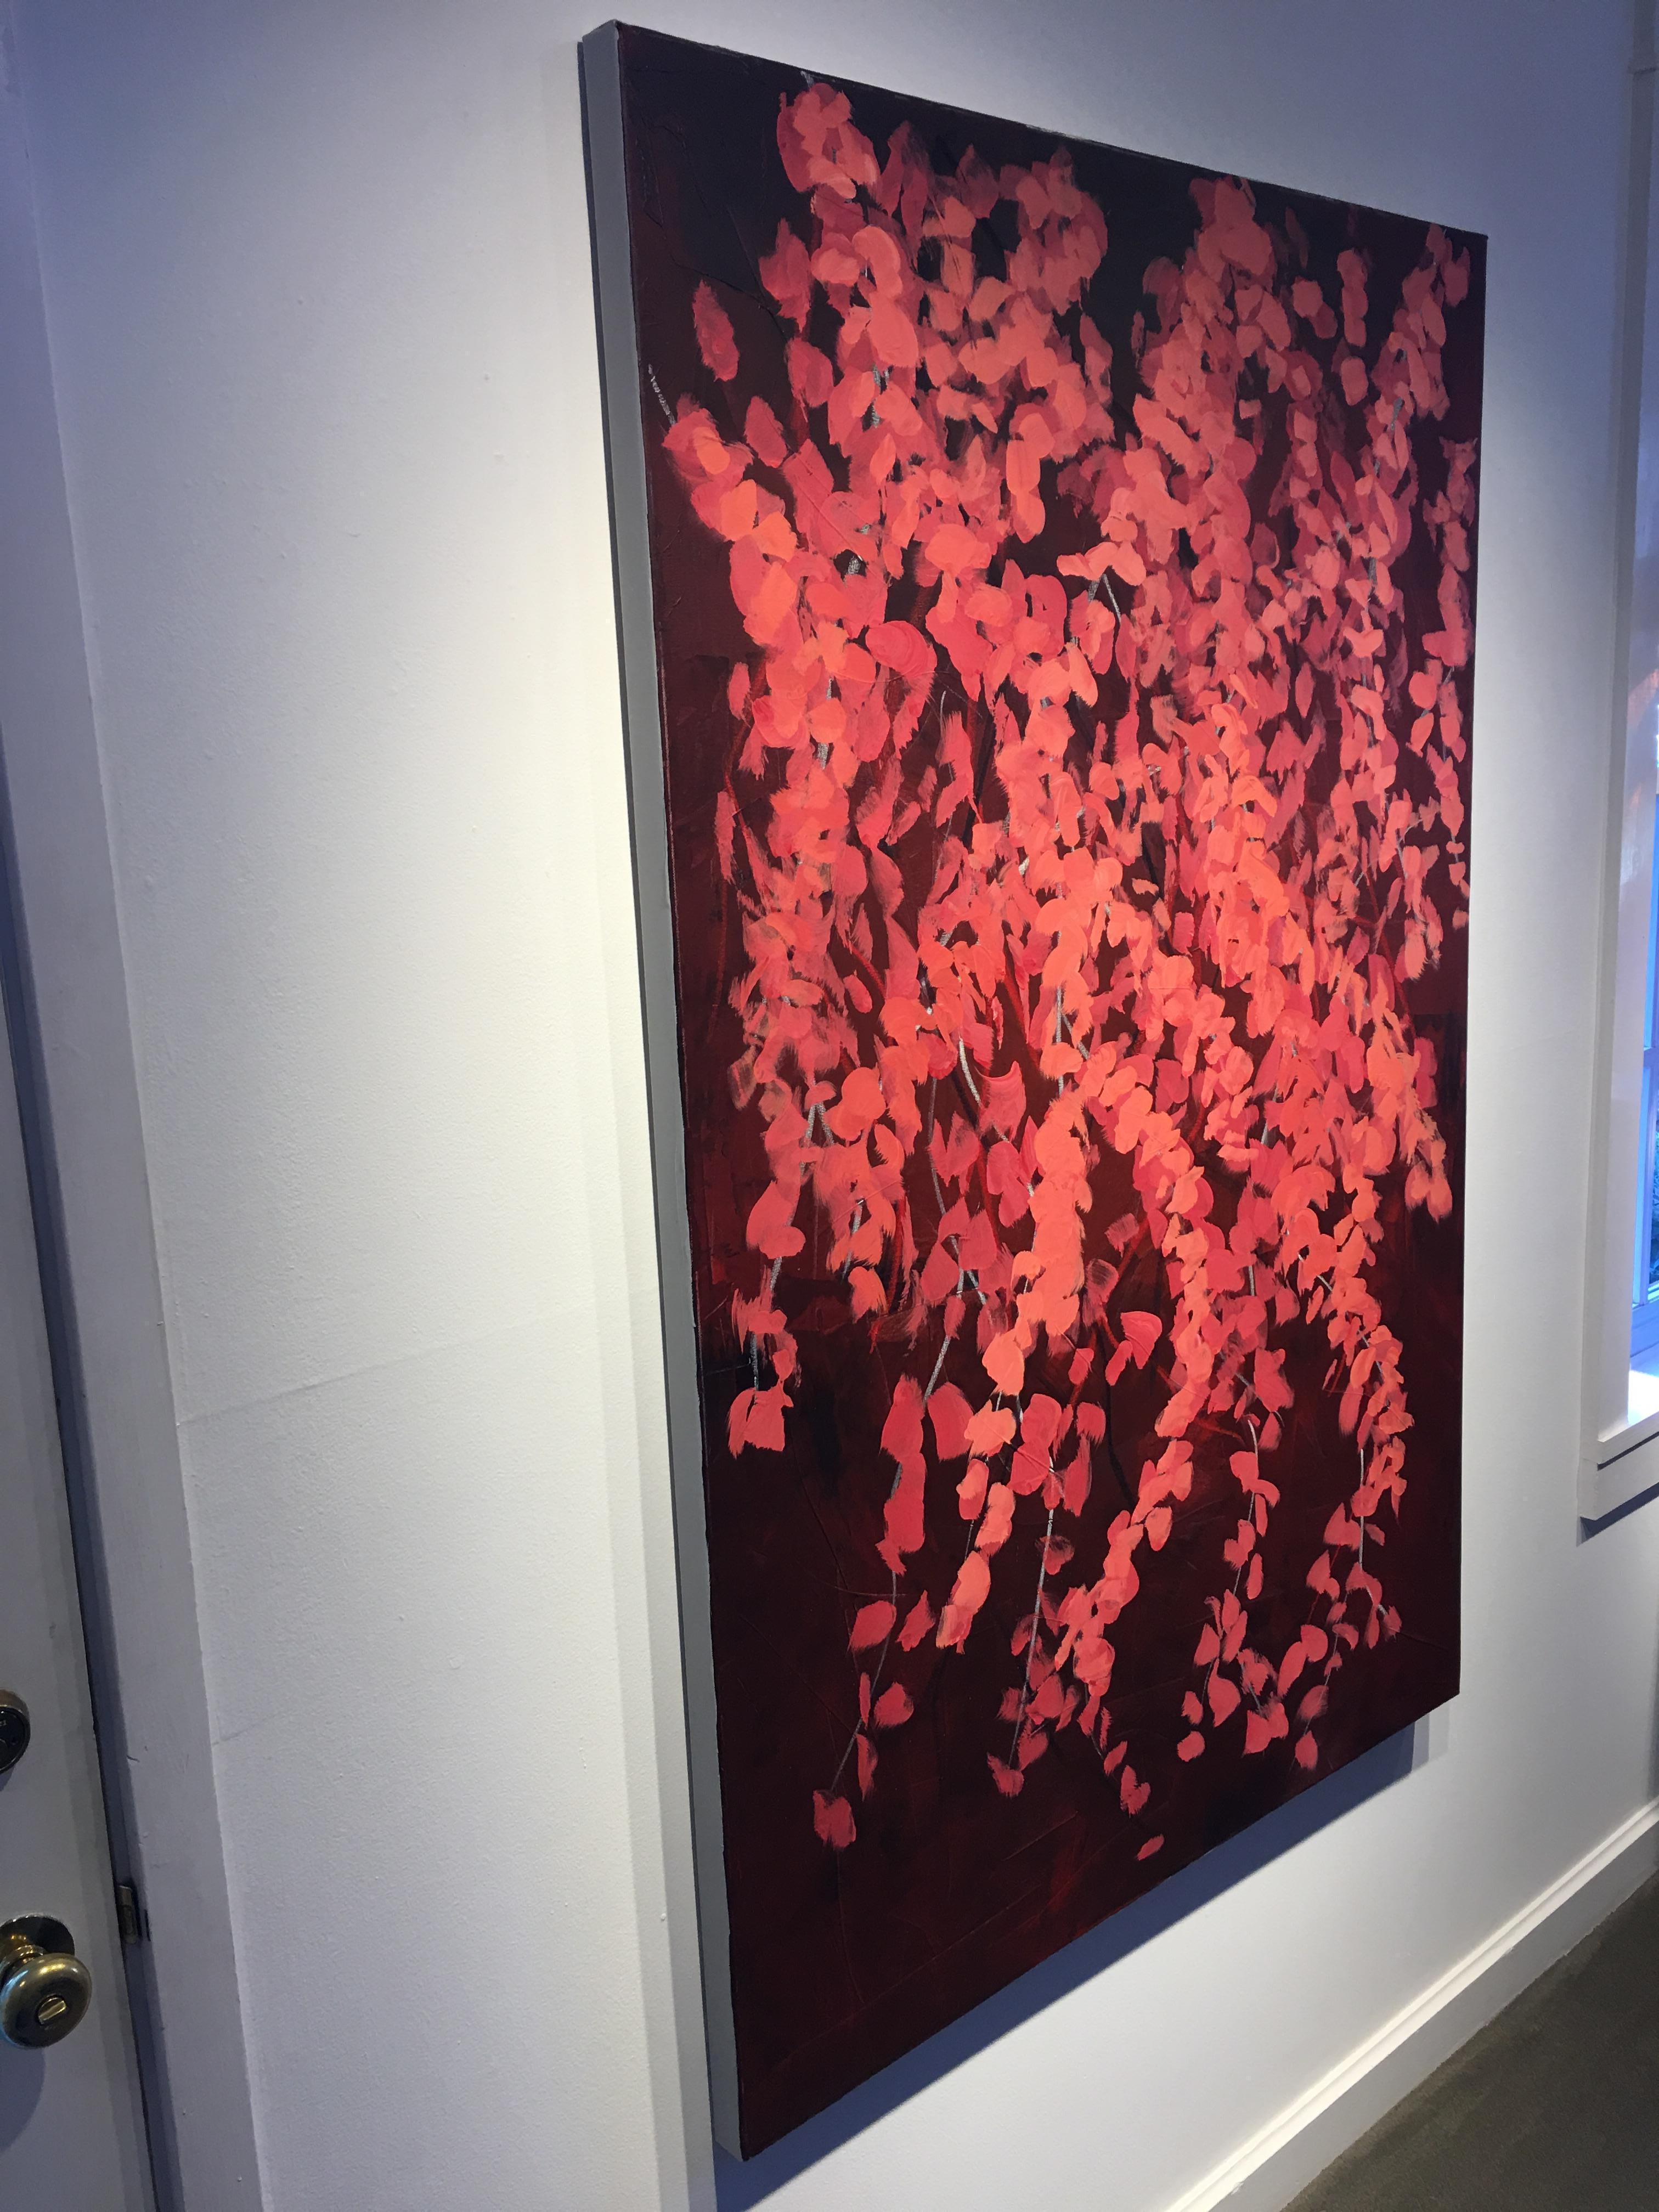 acrylic, oil paintstik on canvas
red orange pink black

Thomas has taken the influences of the flora of Chinese ink drawings. He translates those ideas into spontaneous modern abstractions. He starts with several layers of acrylic, using processes